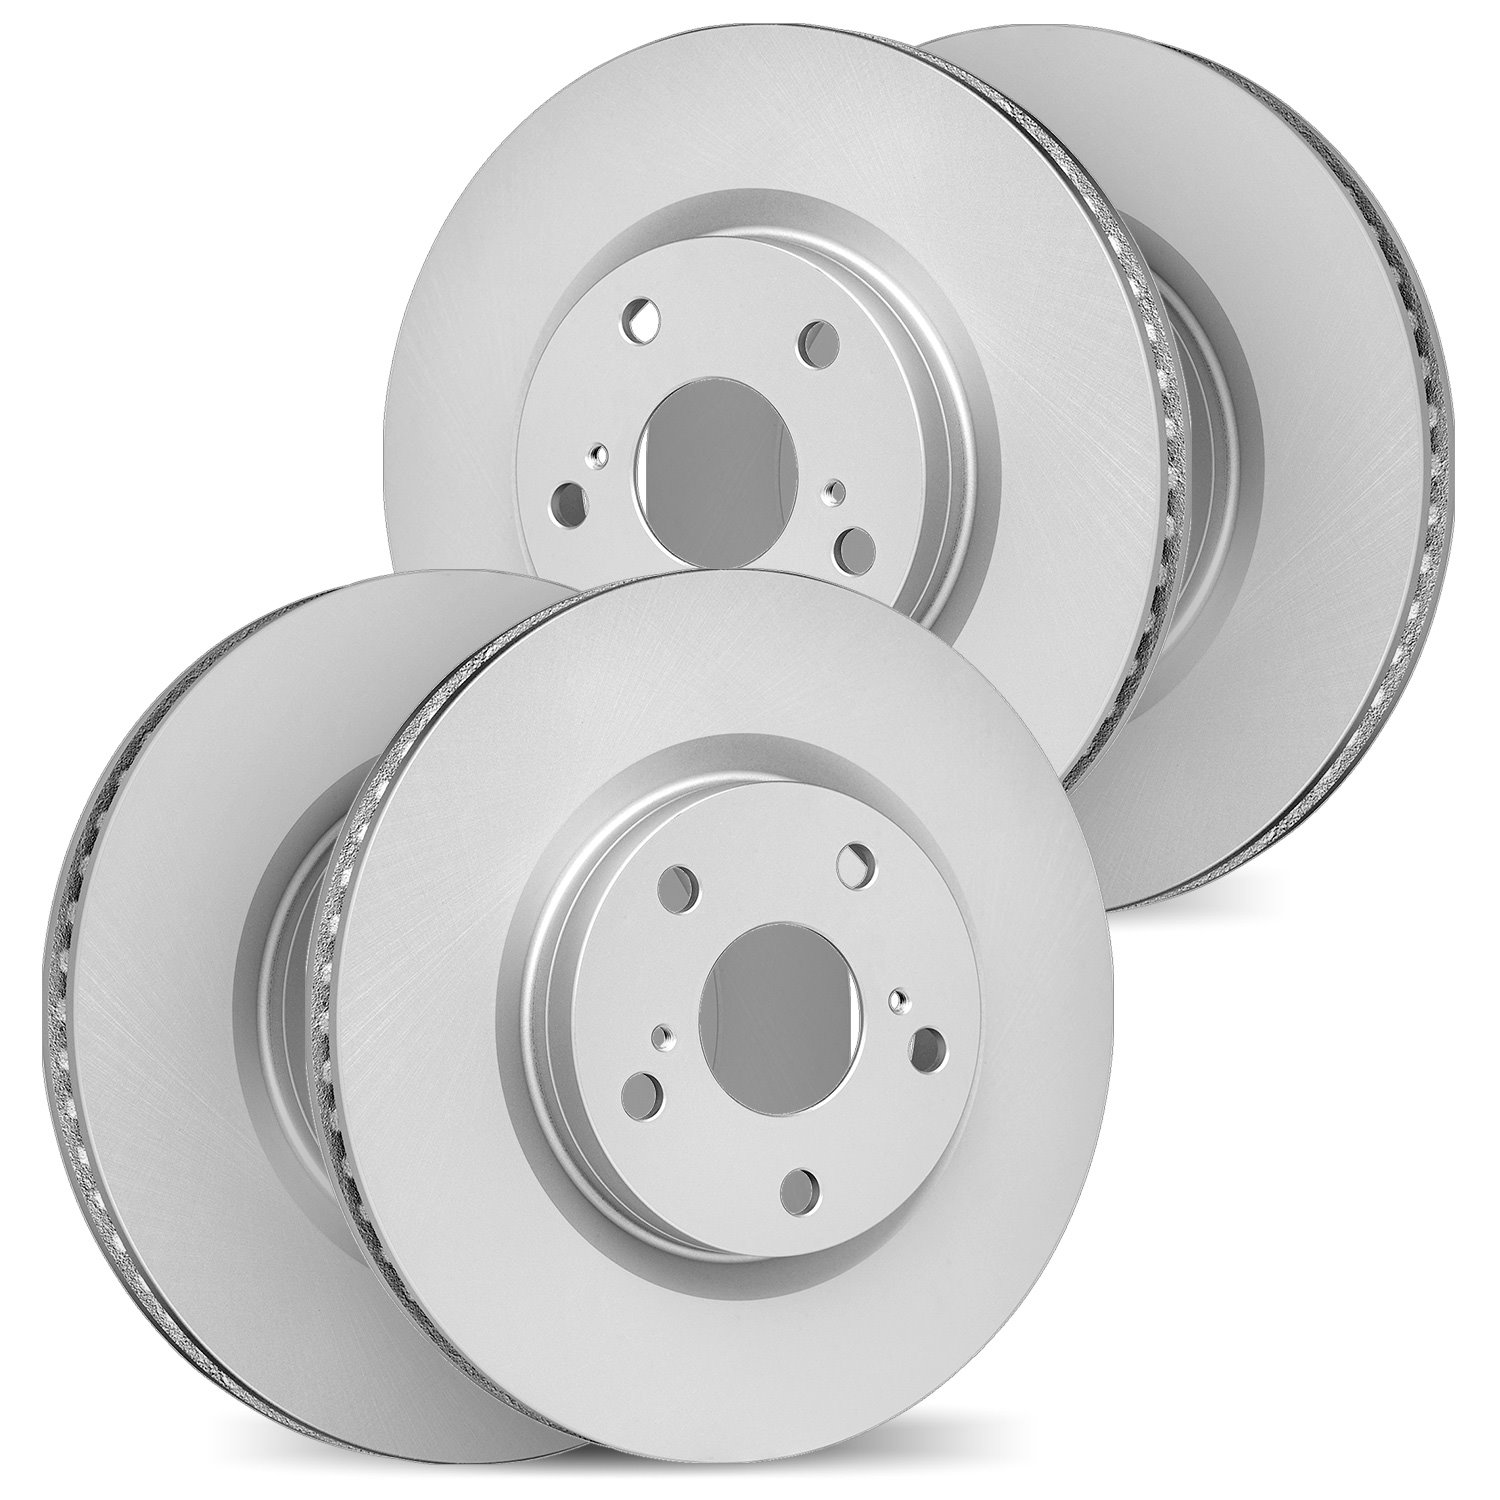 4004-67056 Geospec Brake Rotors, Fits Select Infiniti/Nissan, Position: Front and Rear